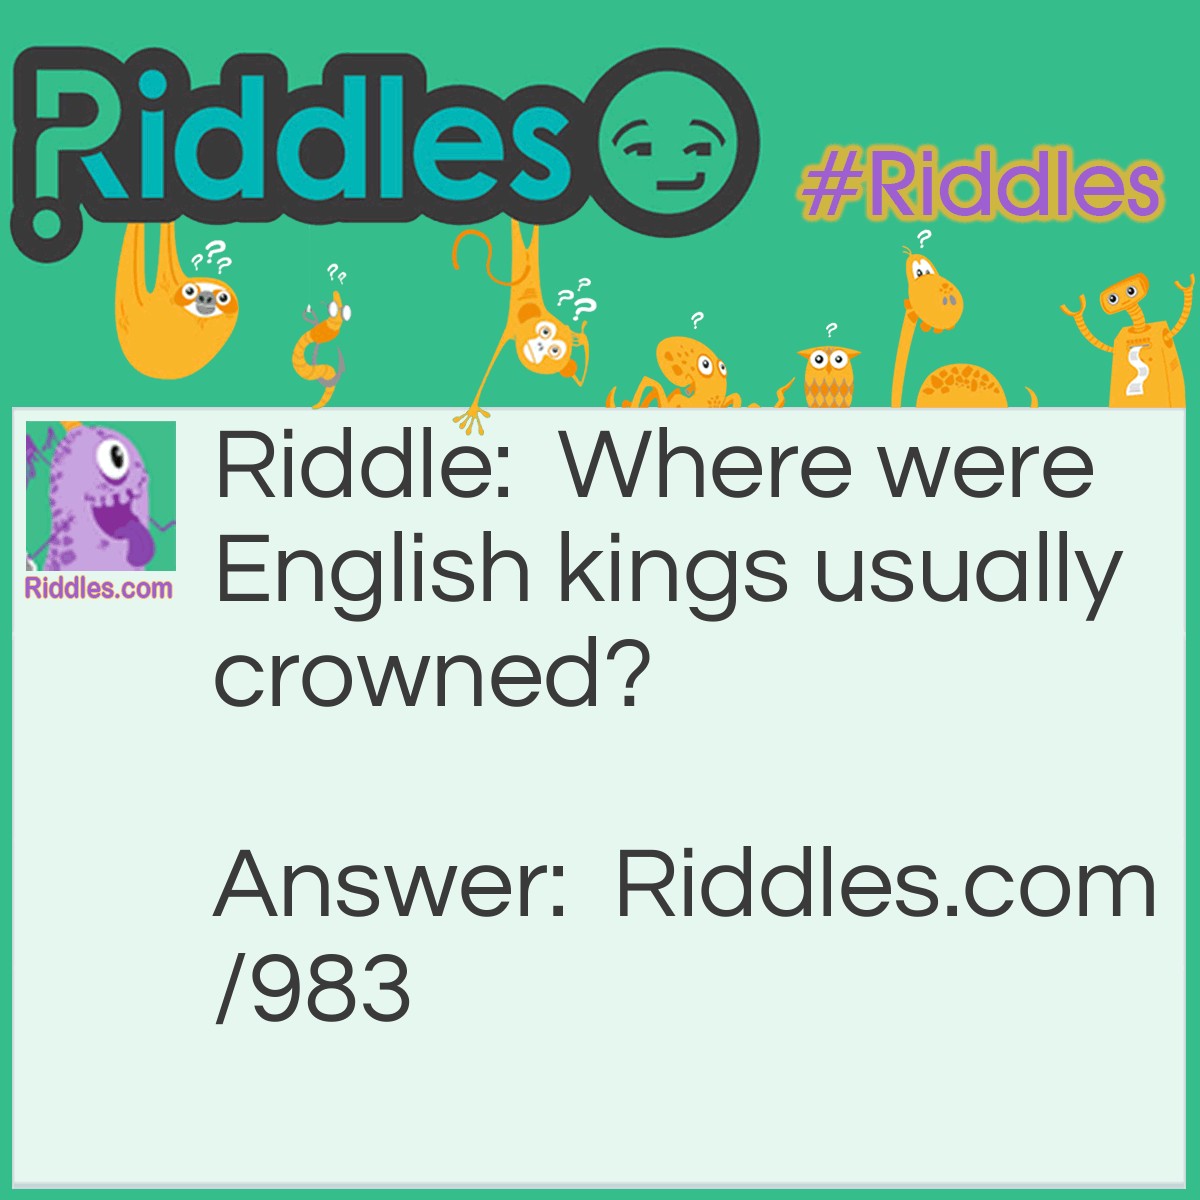 Riddle: Where were English kings usually crowned? Answer: On their heads.